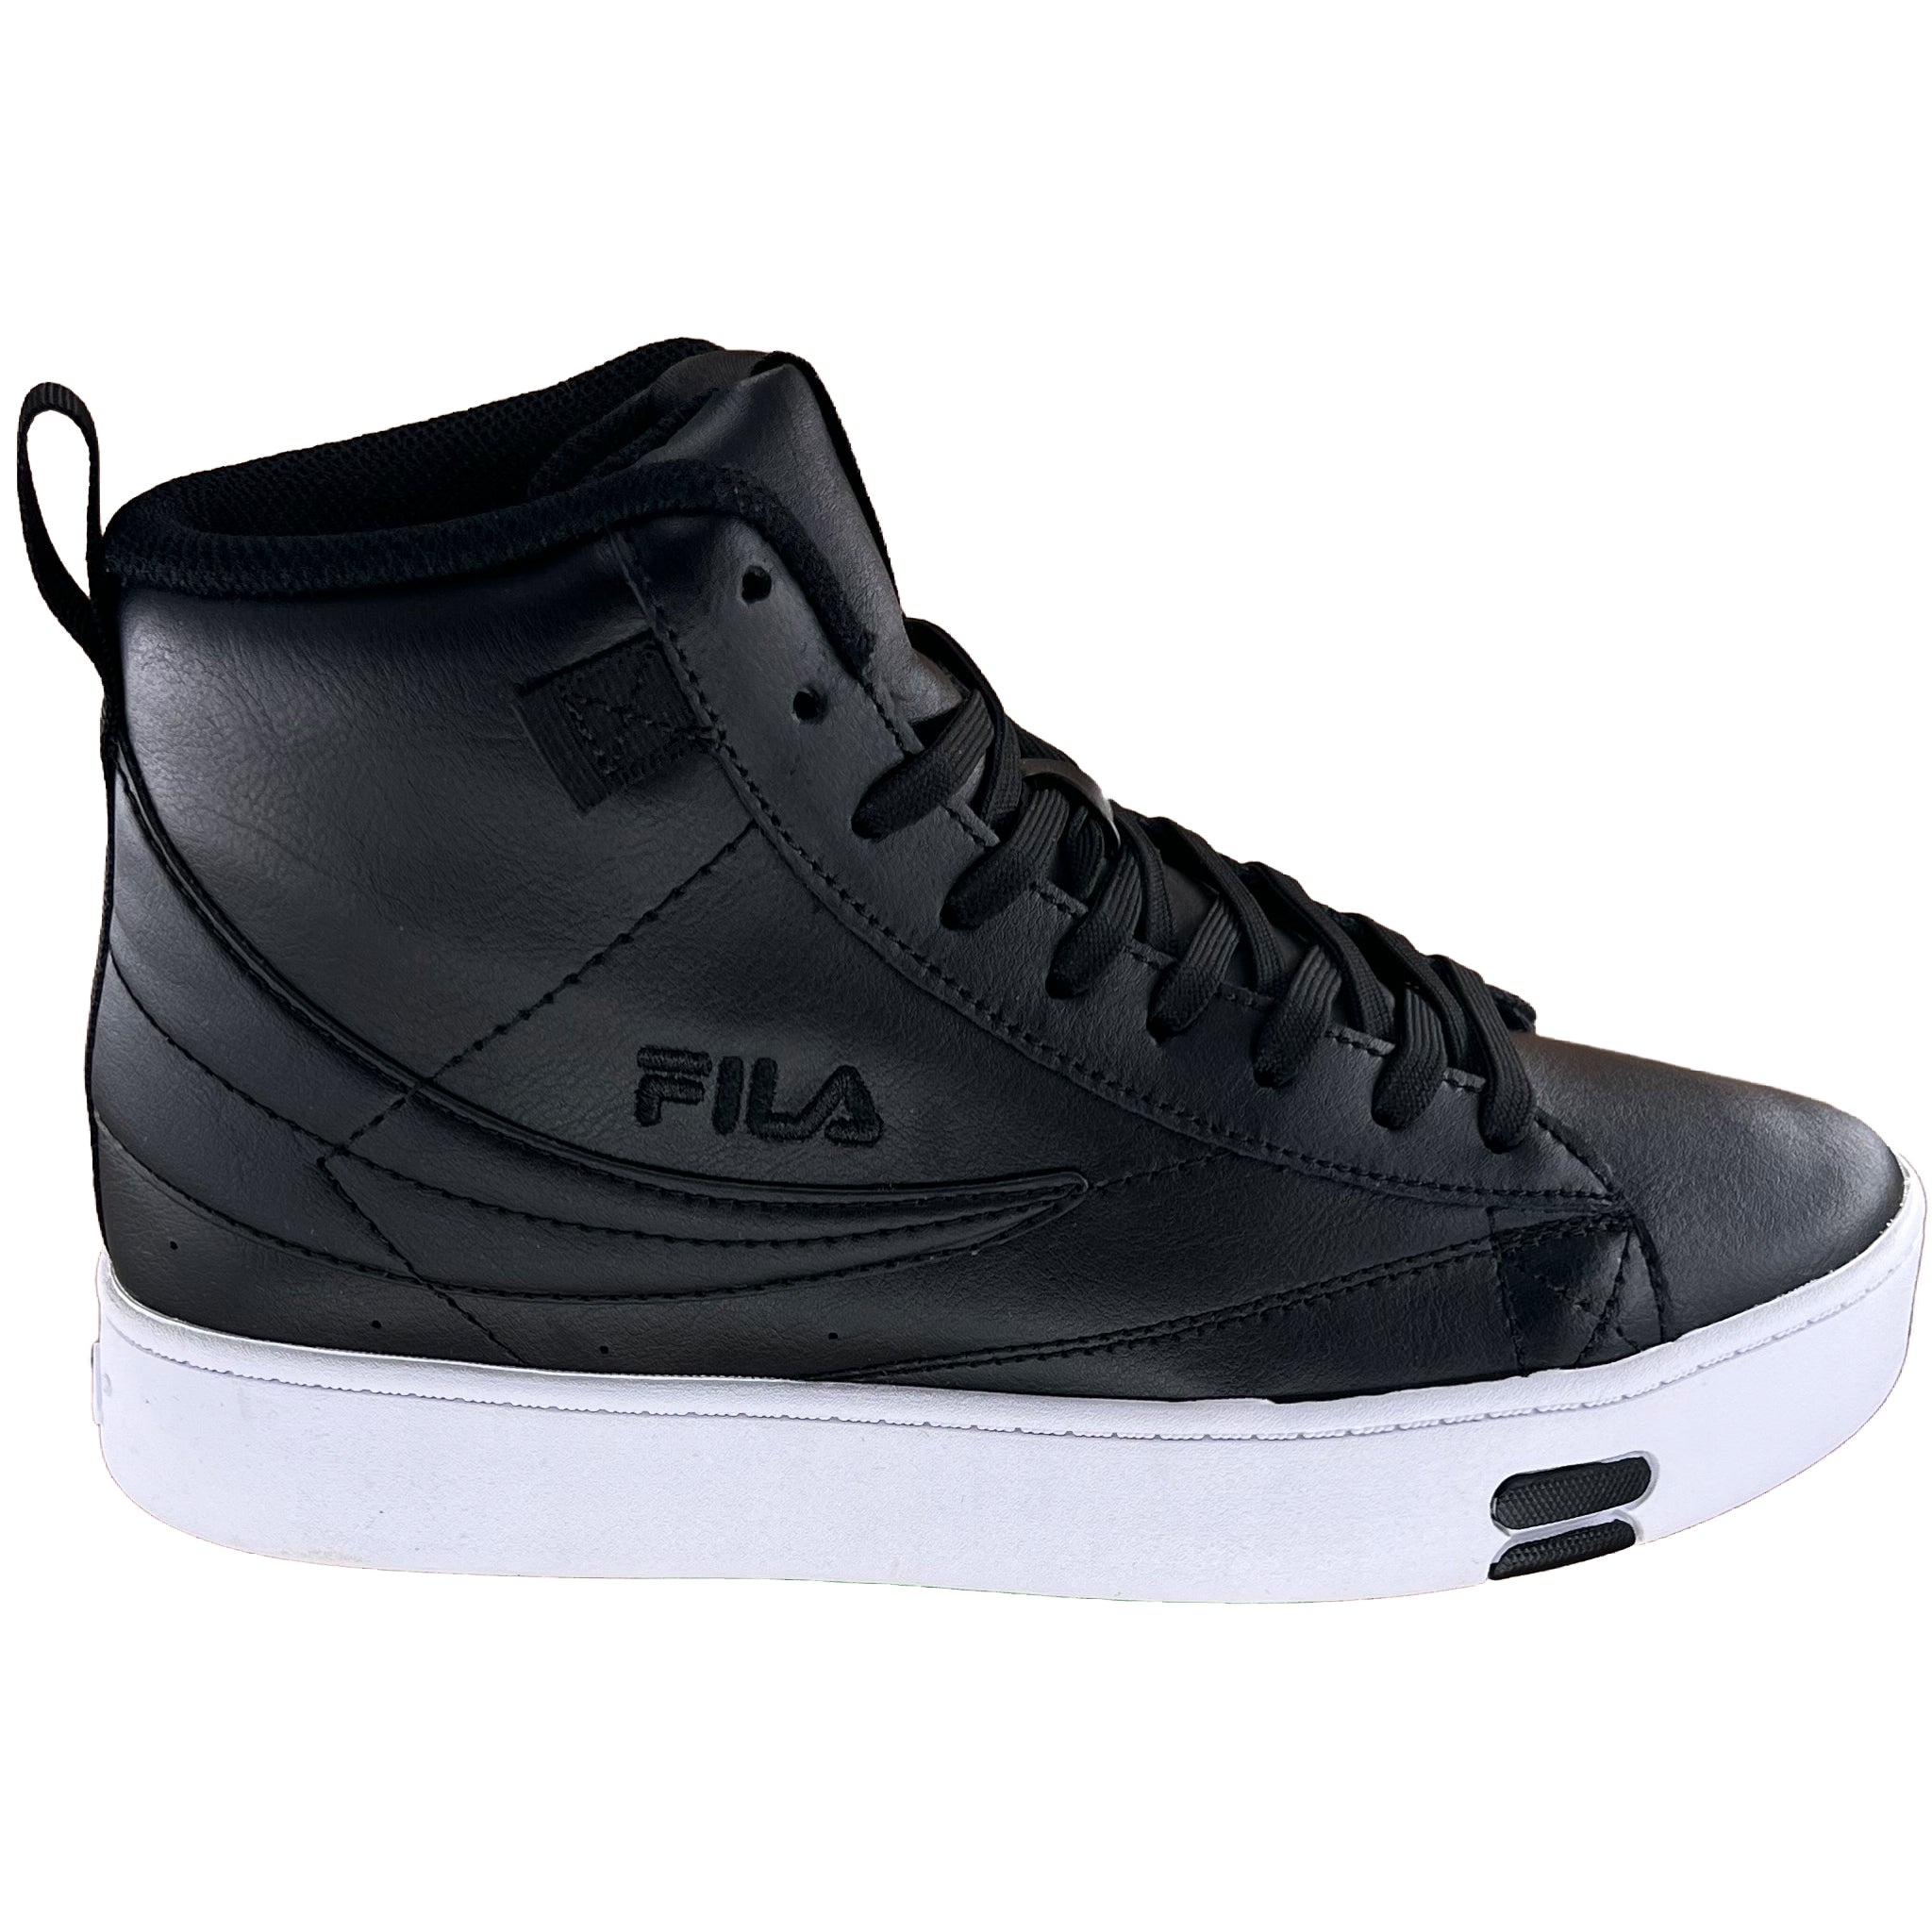 Fila Women's Black White Casual Shoes 5CM01630-013 – That Shoe Store and More